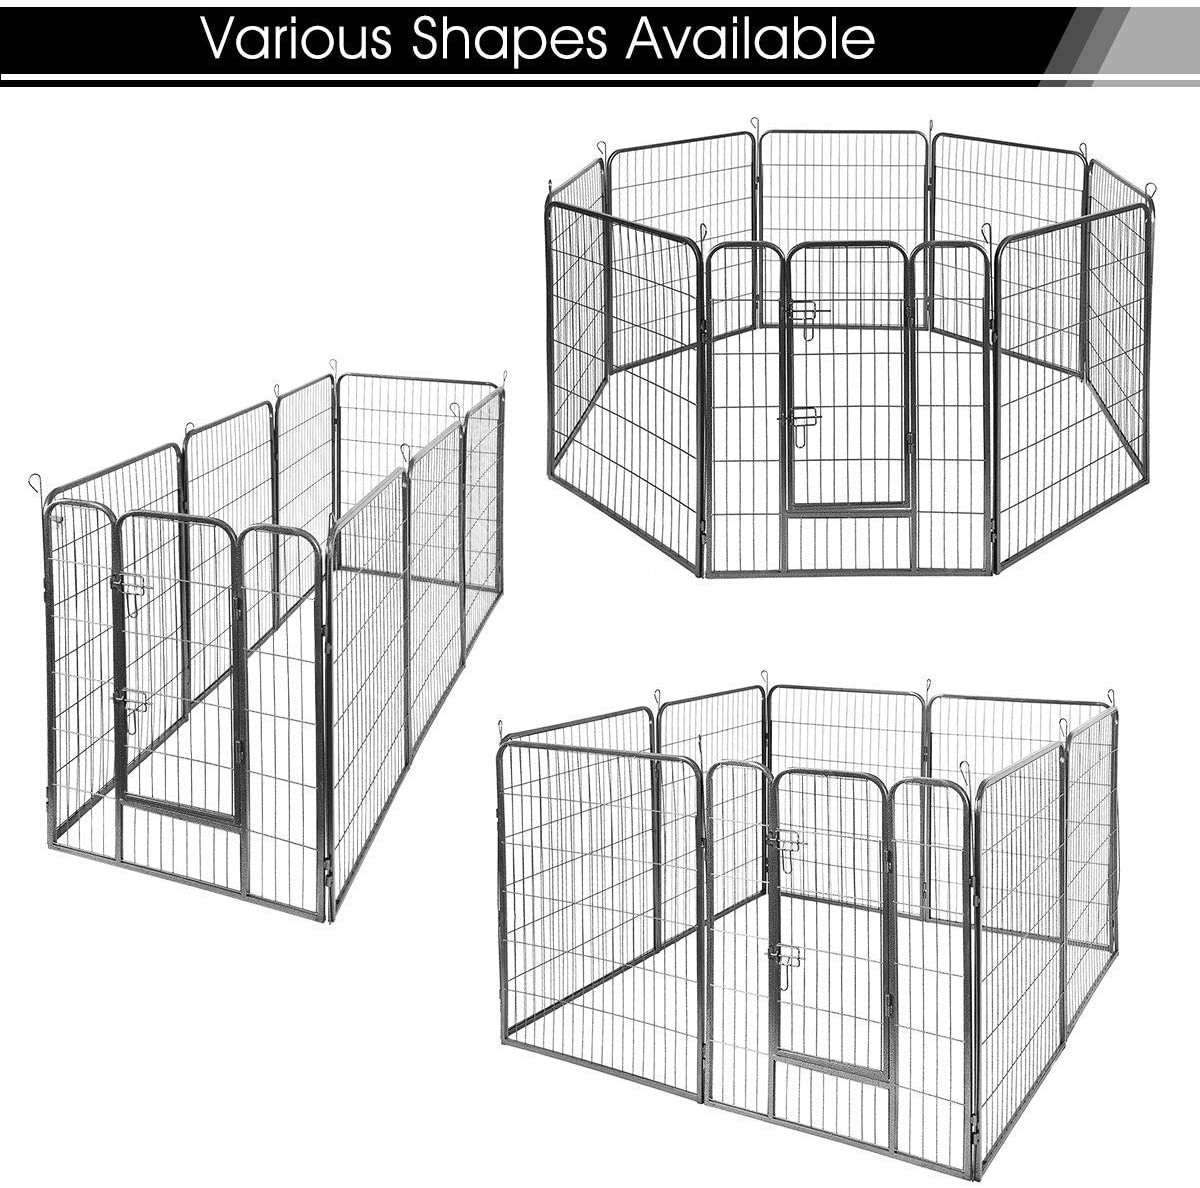 Giantex 40/48Inch Dog Playpen with Door, 16/8 Panel Pet Playpen for Large and Small Dogs, Portable Foldable Freestanding Dog Exercise Pens, Metal Dog Playpen Indoor & Outdoor (16 Panels, 40) Animals & Pet Supplies > Pet Supplies > Dog Supplies > Dog Treadmills Giantex   